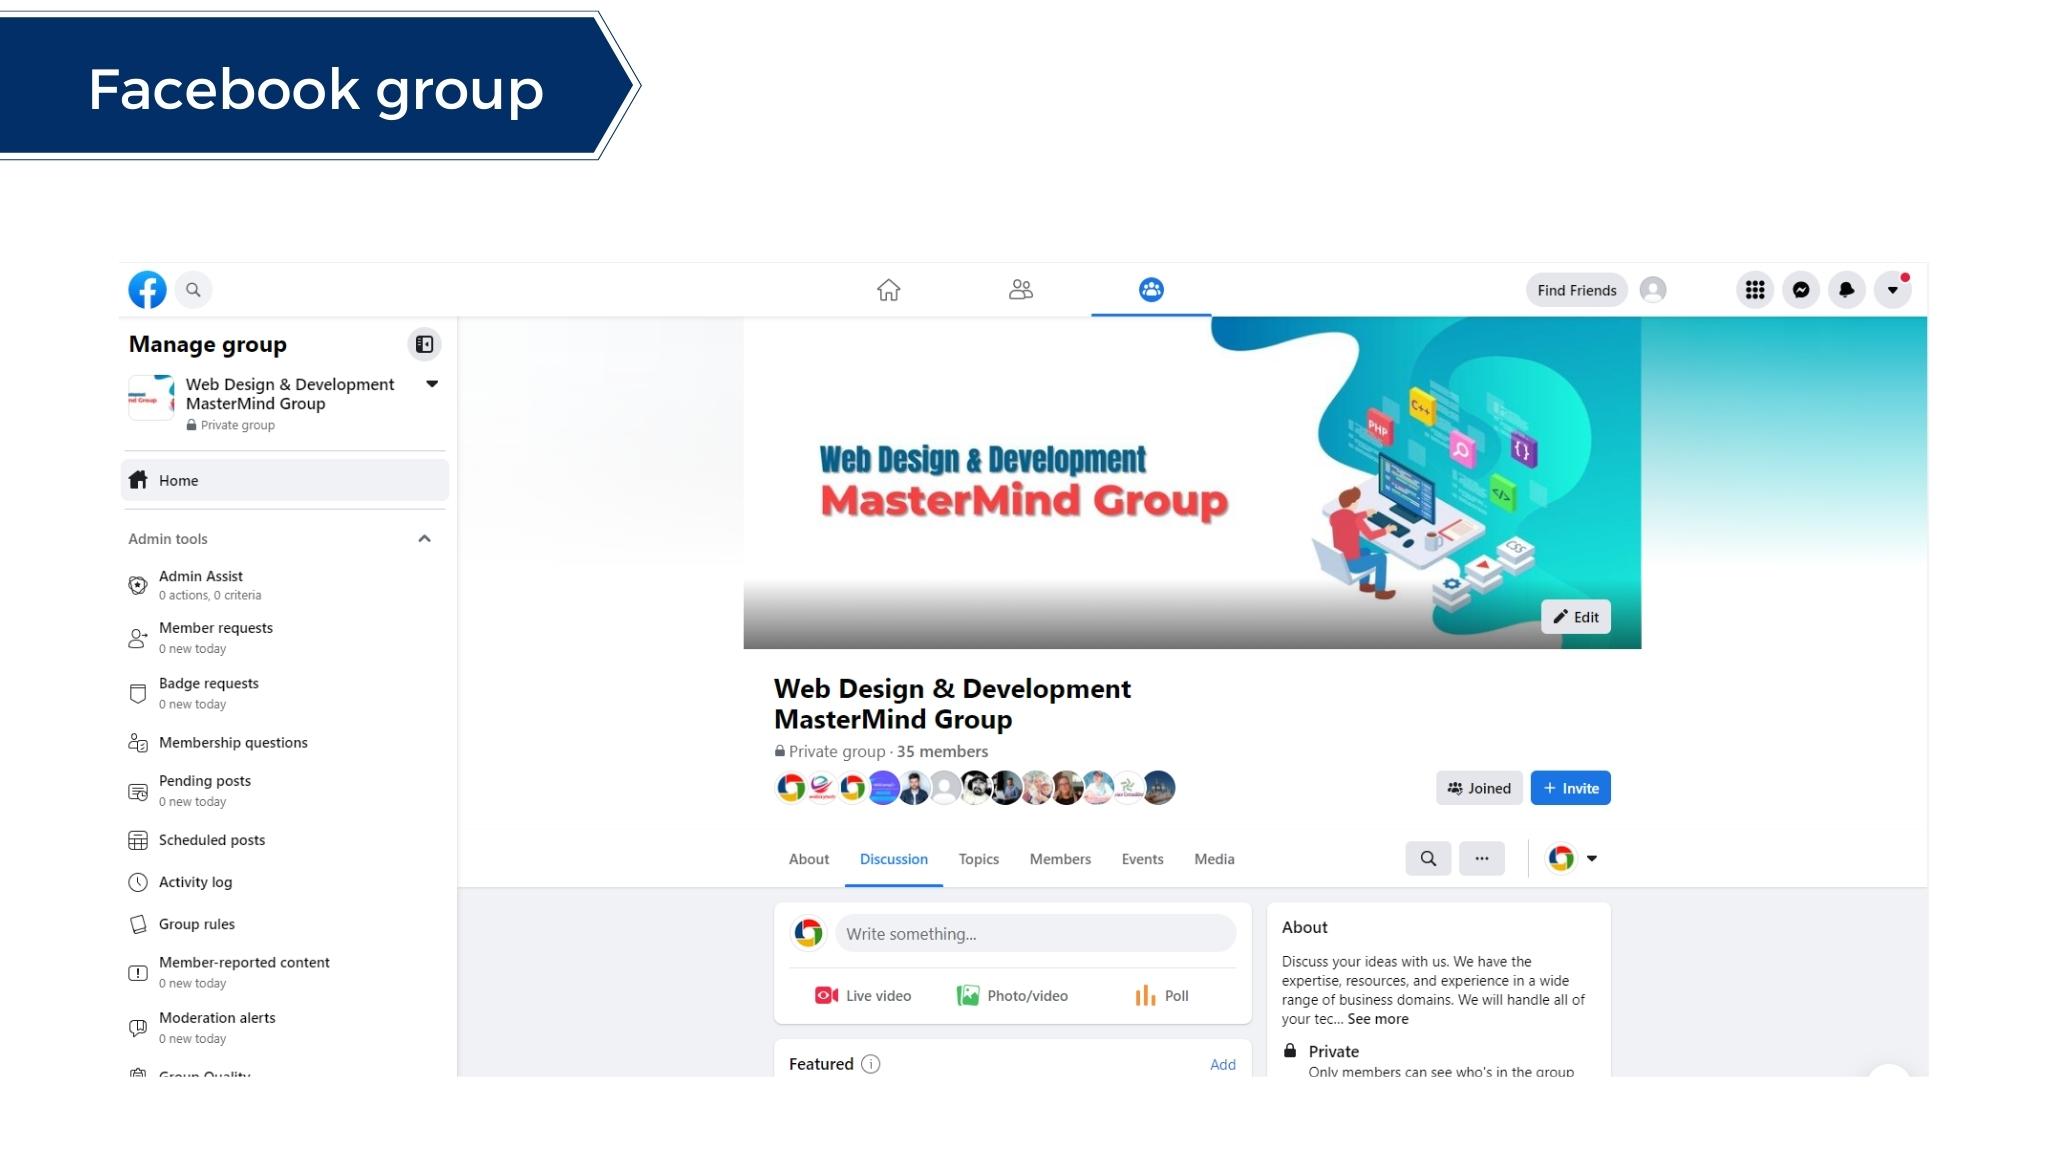 Create a Community business page and Facebook group